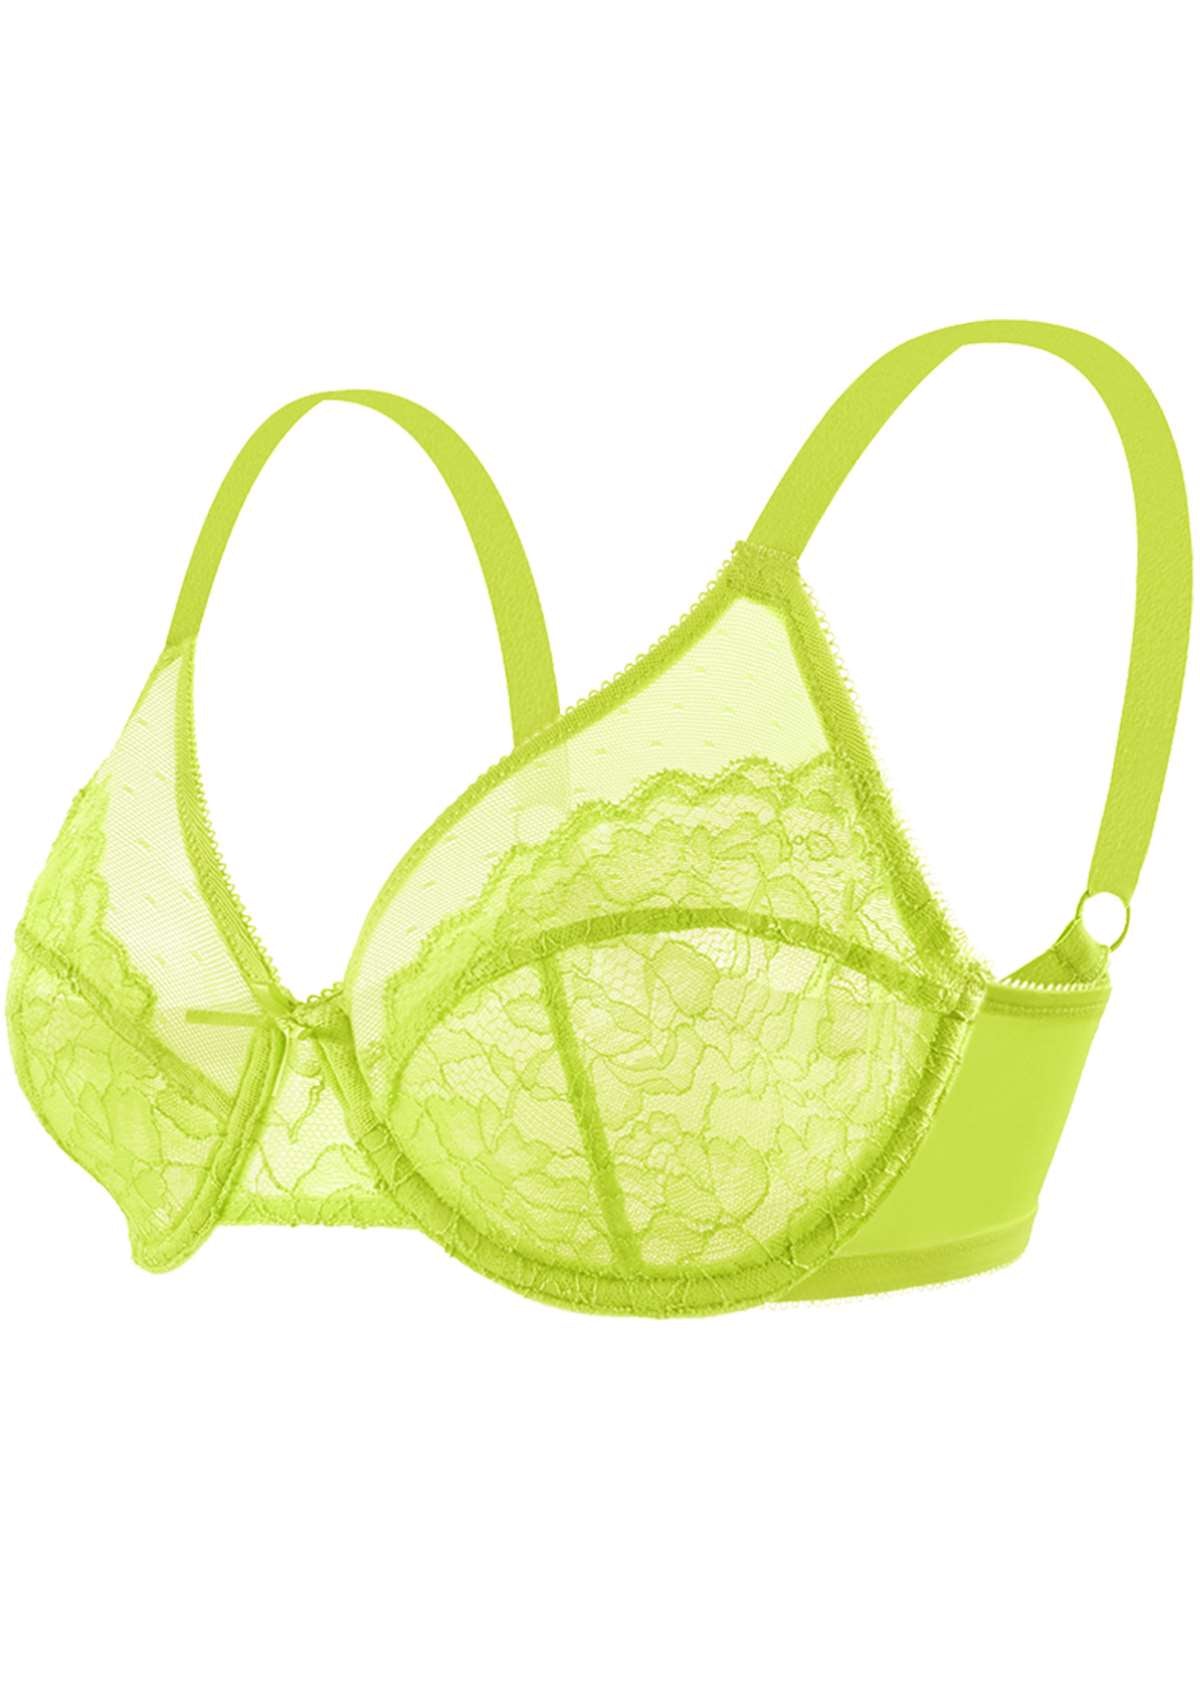 HSIA Enchante Full Cup Minimizing Bra: Supportive Unlined Lace Bra - Lime Green / 40 / DD/E